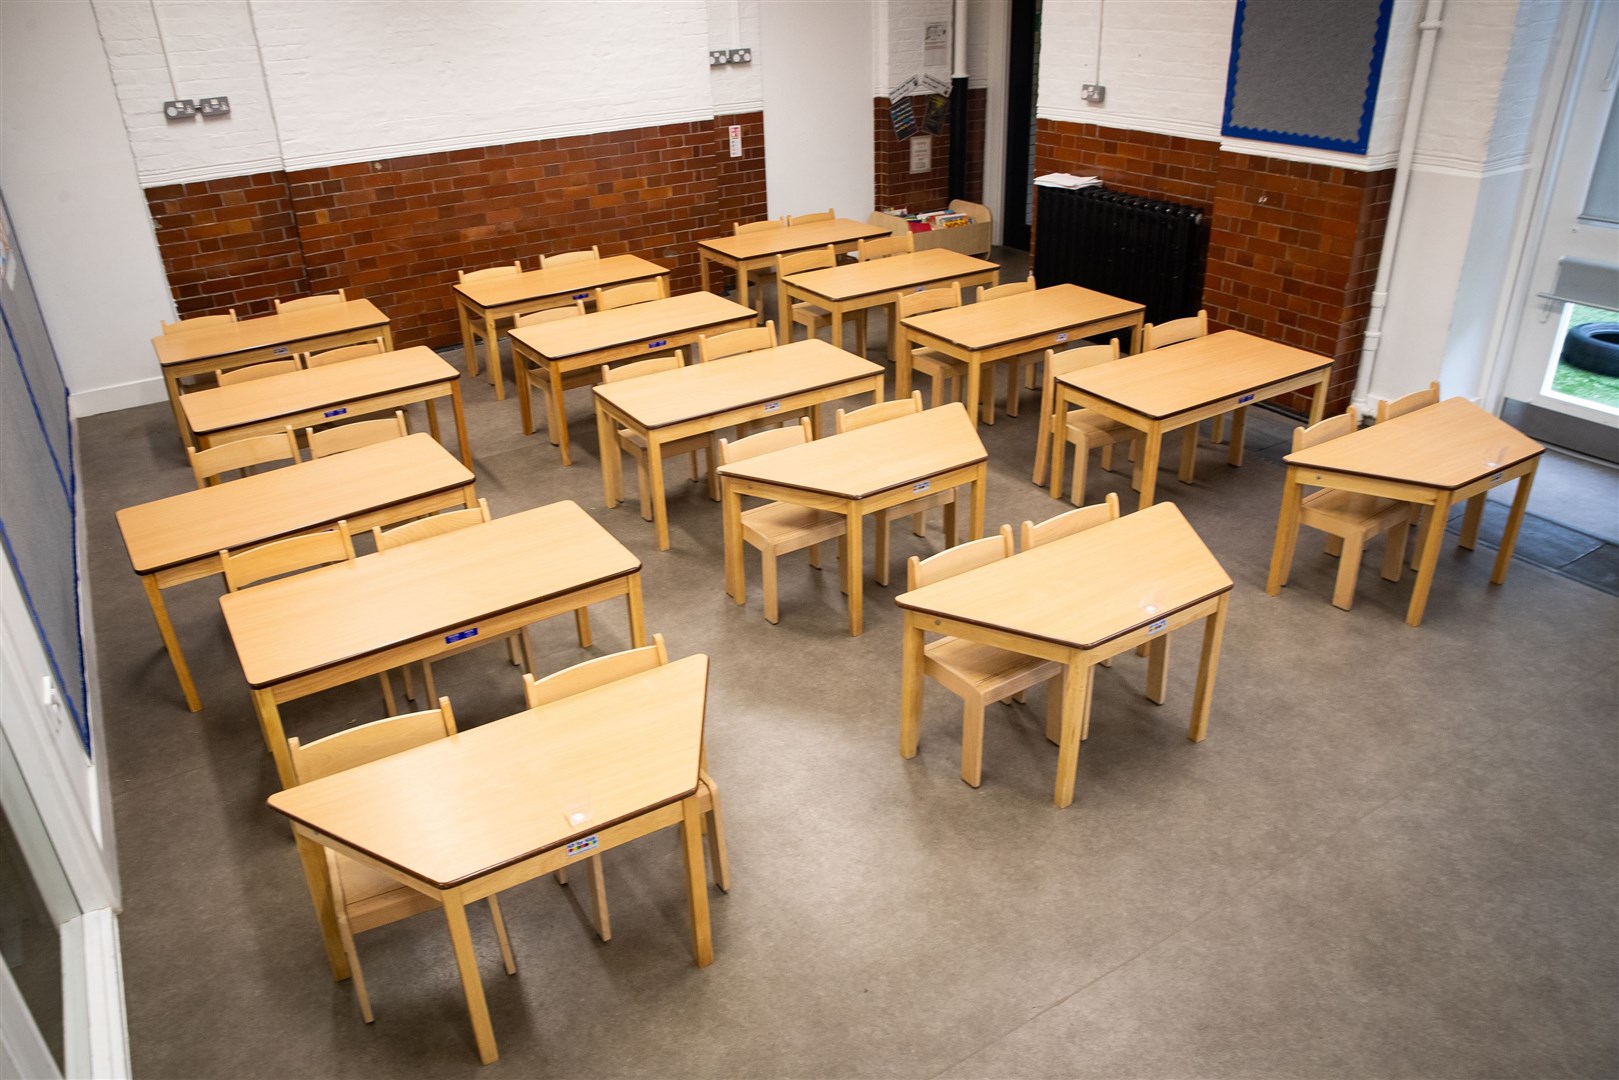 Tables and chairs spaced out for social distancing at the Charles Dickens Primary School in London (Aaron Chown/PA)